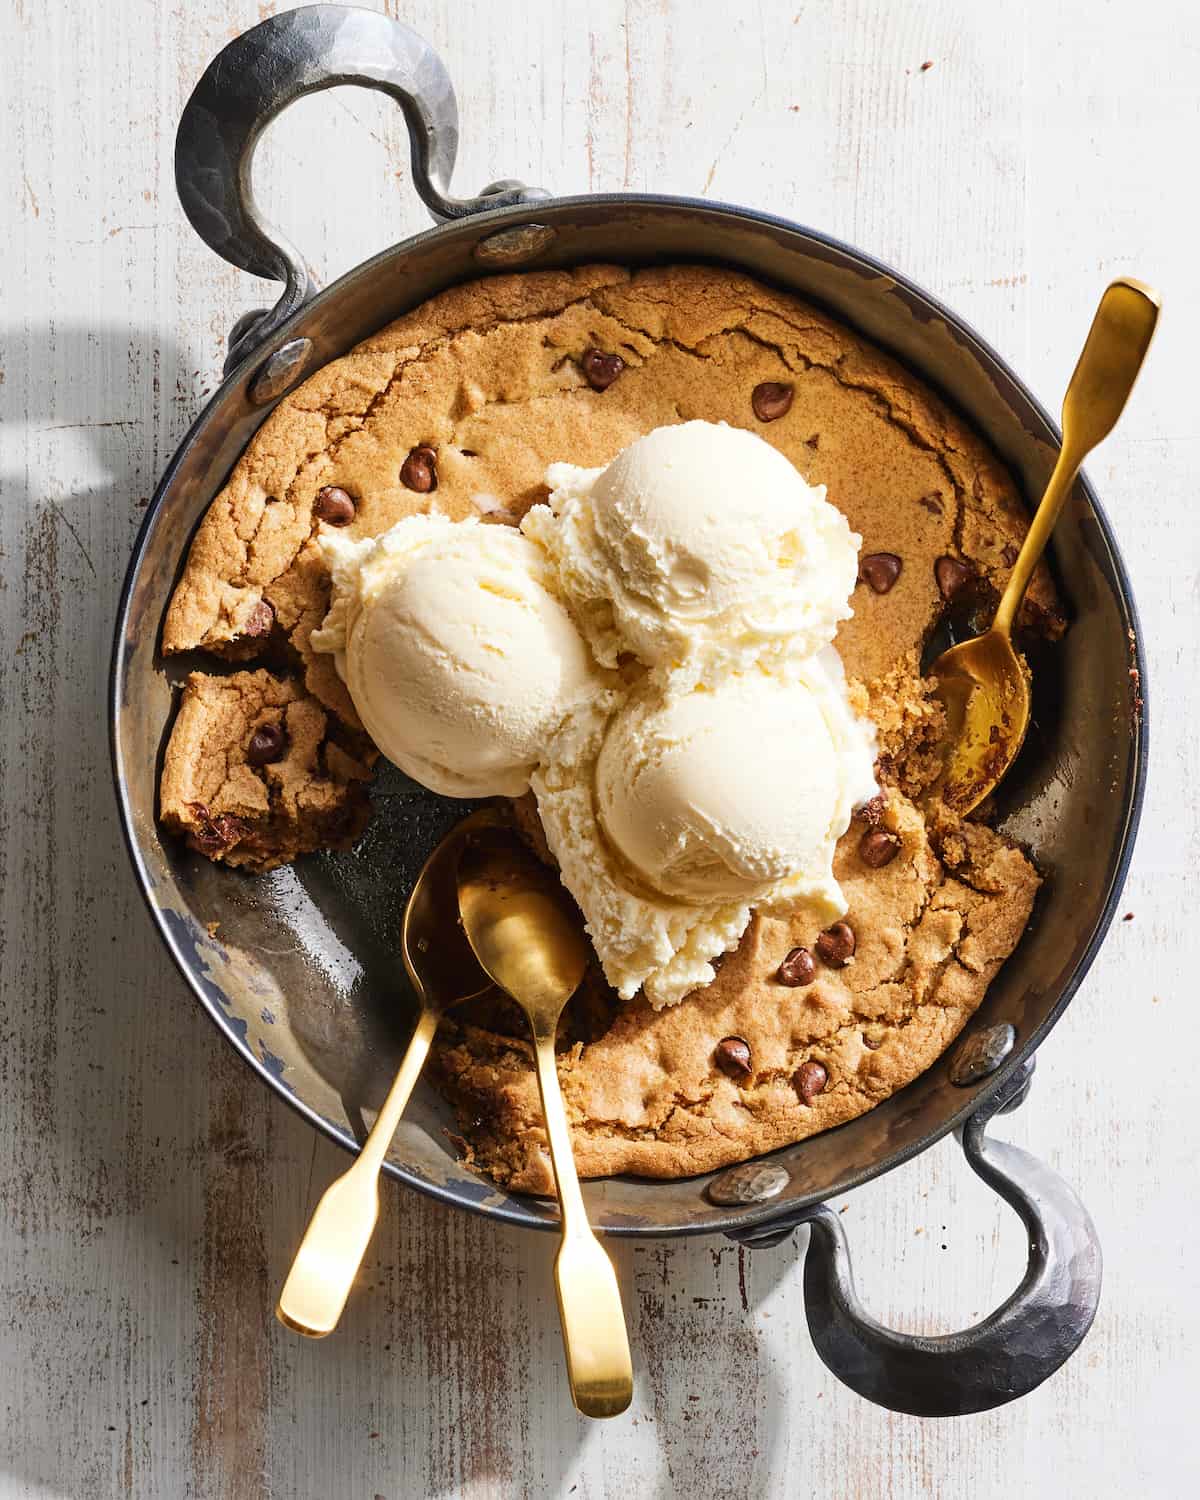 A skillet with a giant chocolate chip cookie the size of the skillet, called pizookie, topped with three scoops of vanilla ice cream, along with three spoons and few bites taken out.